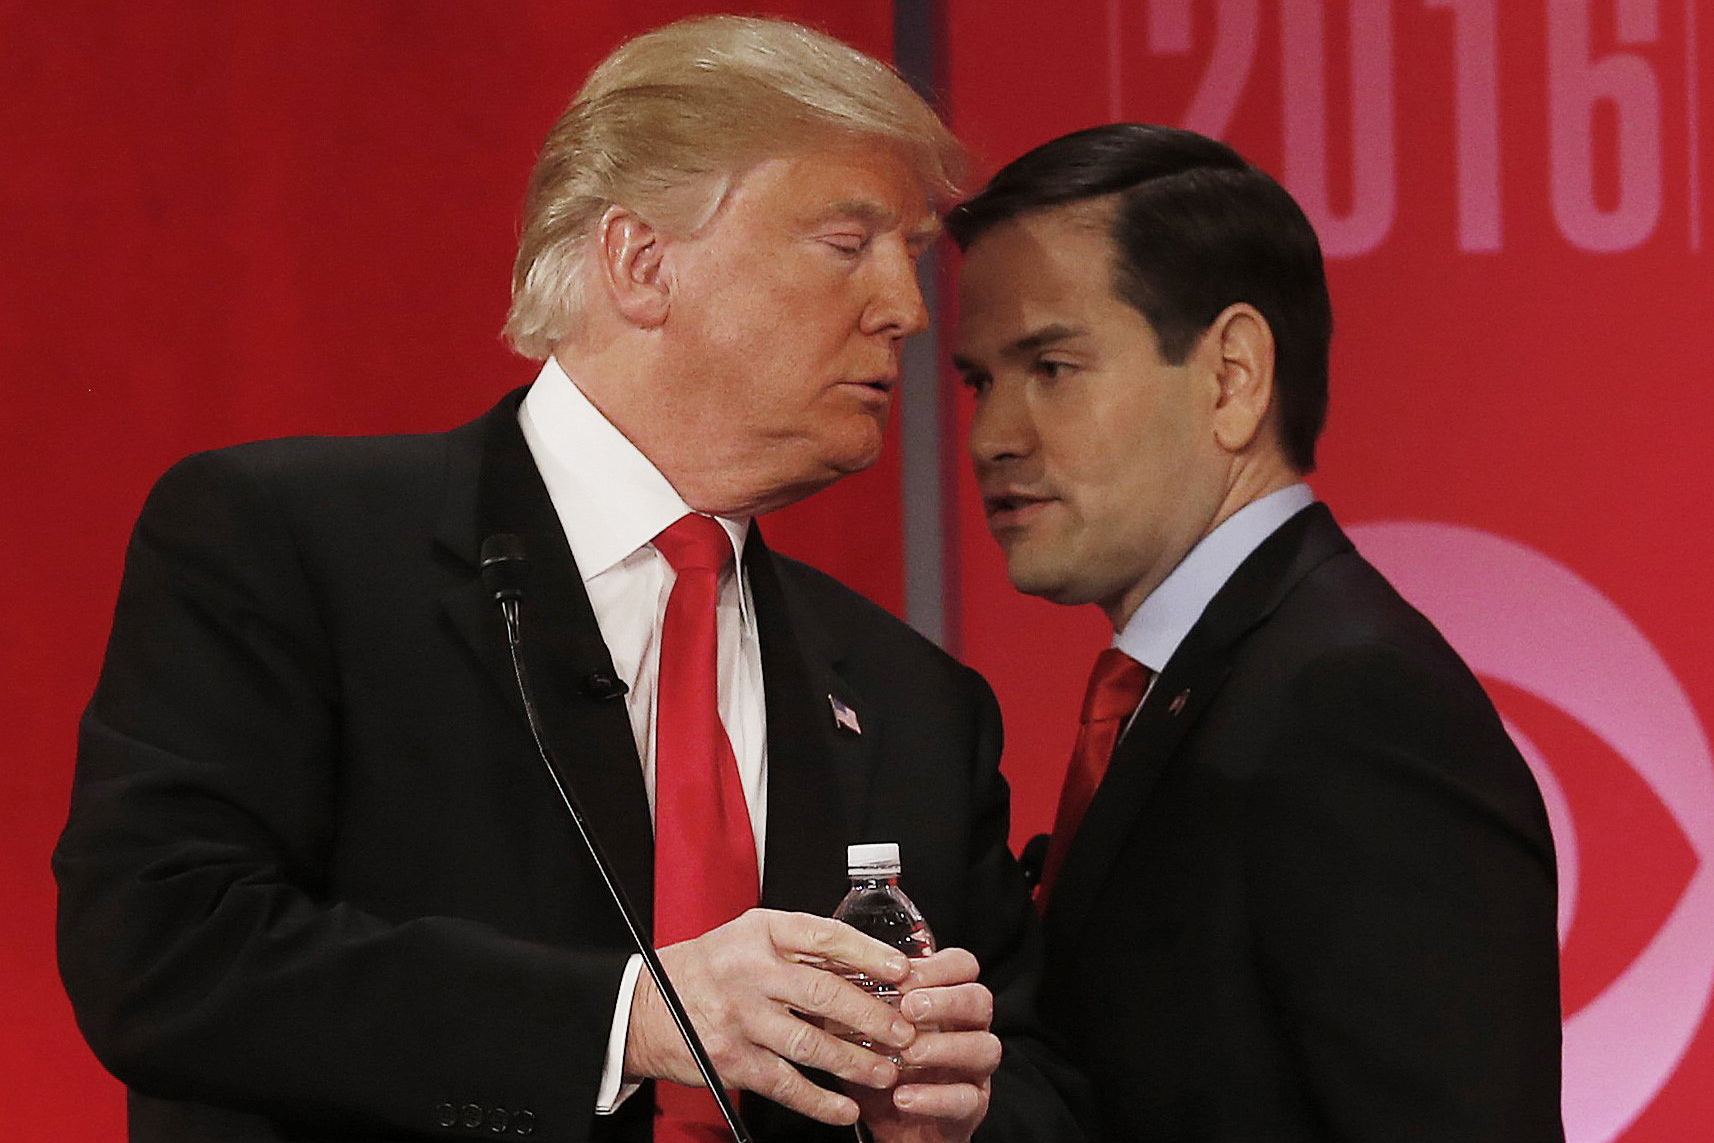 Republican presidential candidate, Sen. Marco Rubio, right, speaks to Republican presidential candidate Donald Trump during the CBS News Republican presidential debate at the Peace Center in Greenville, S.C., Feb. 13, 2016.